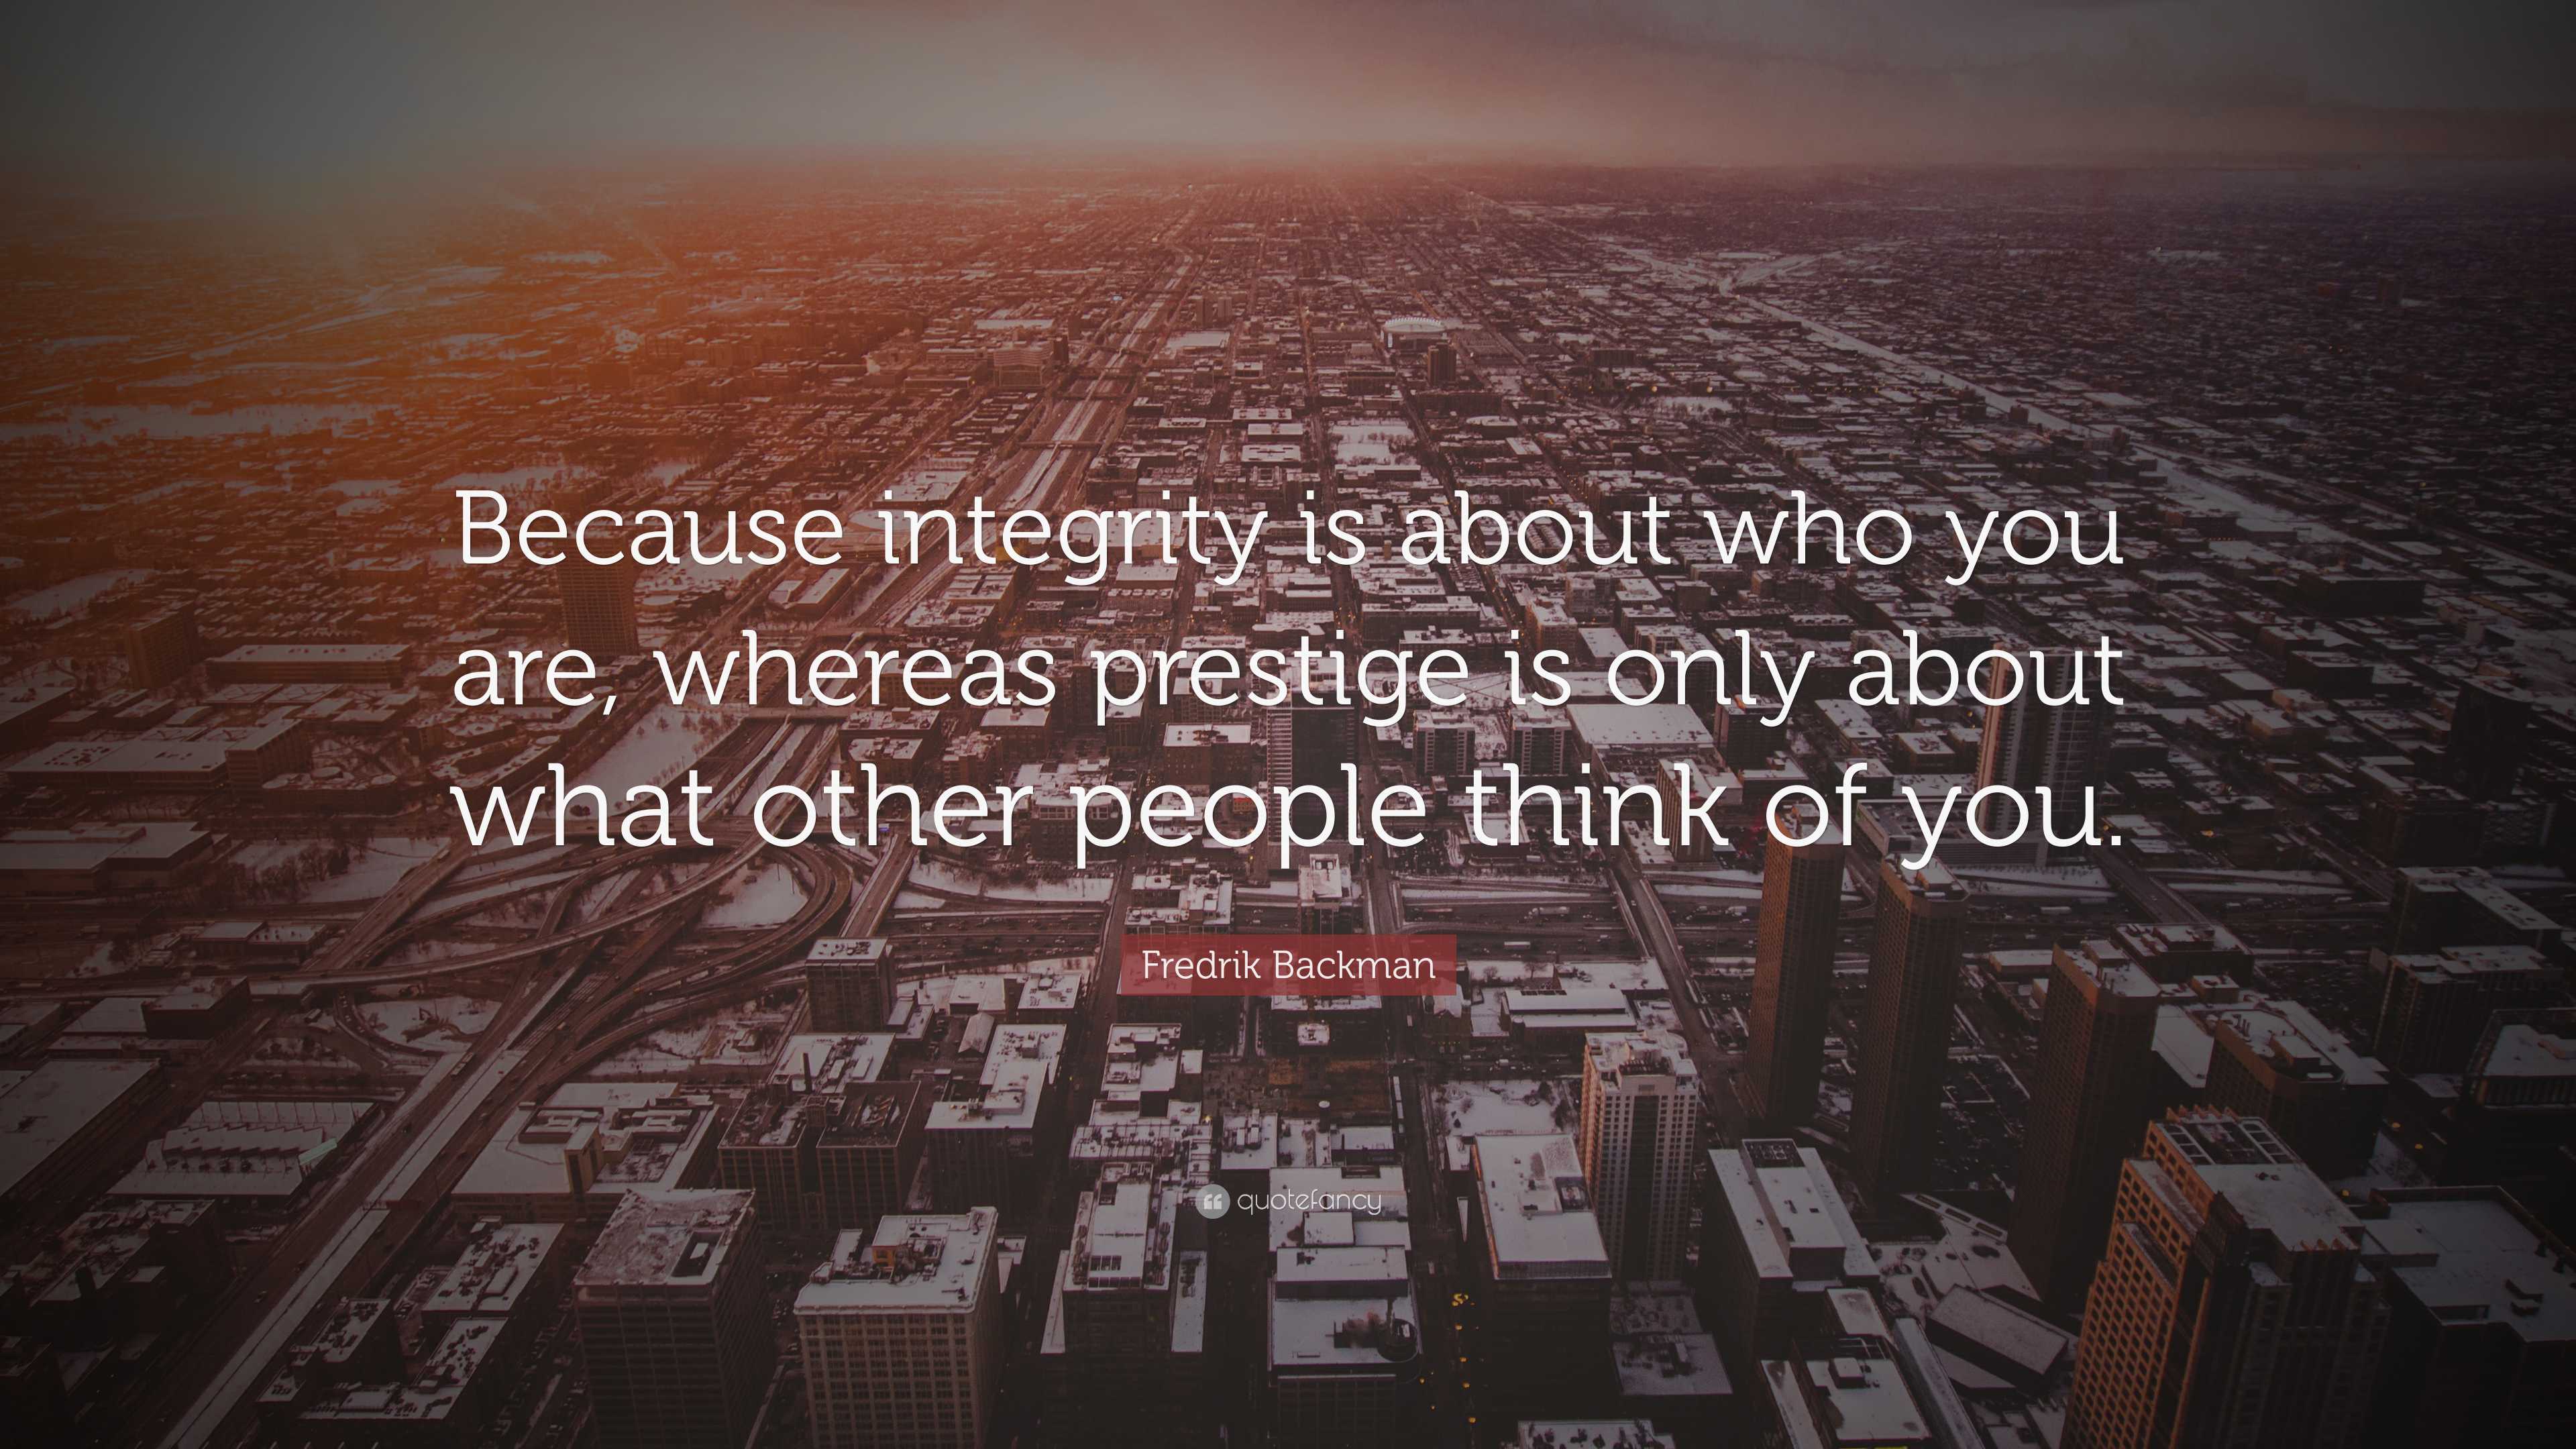 Fredrik Backman Quote: “Because integrity is about who you are, whereas ...